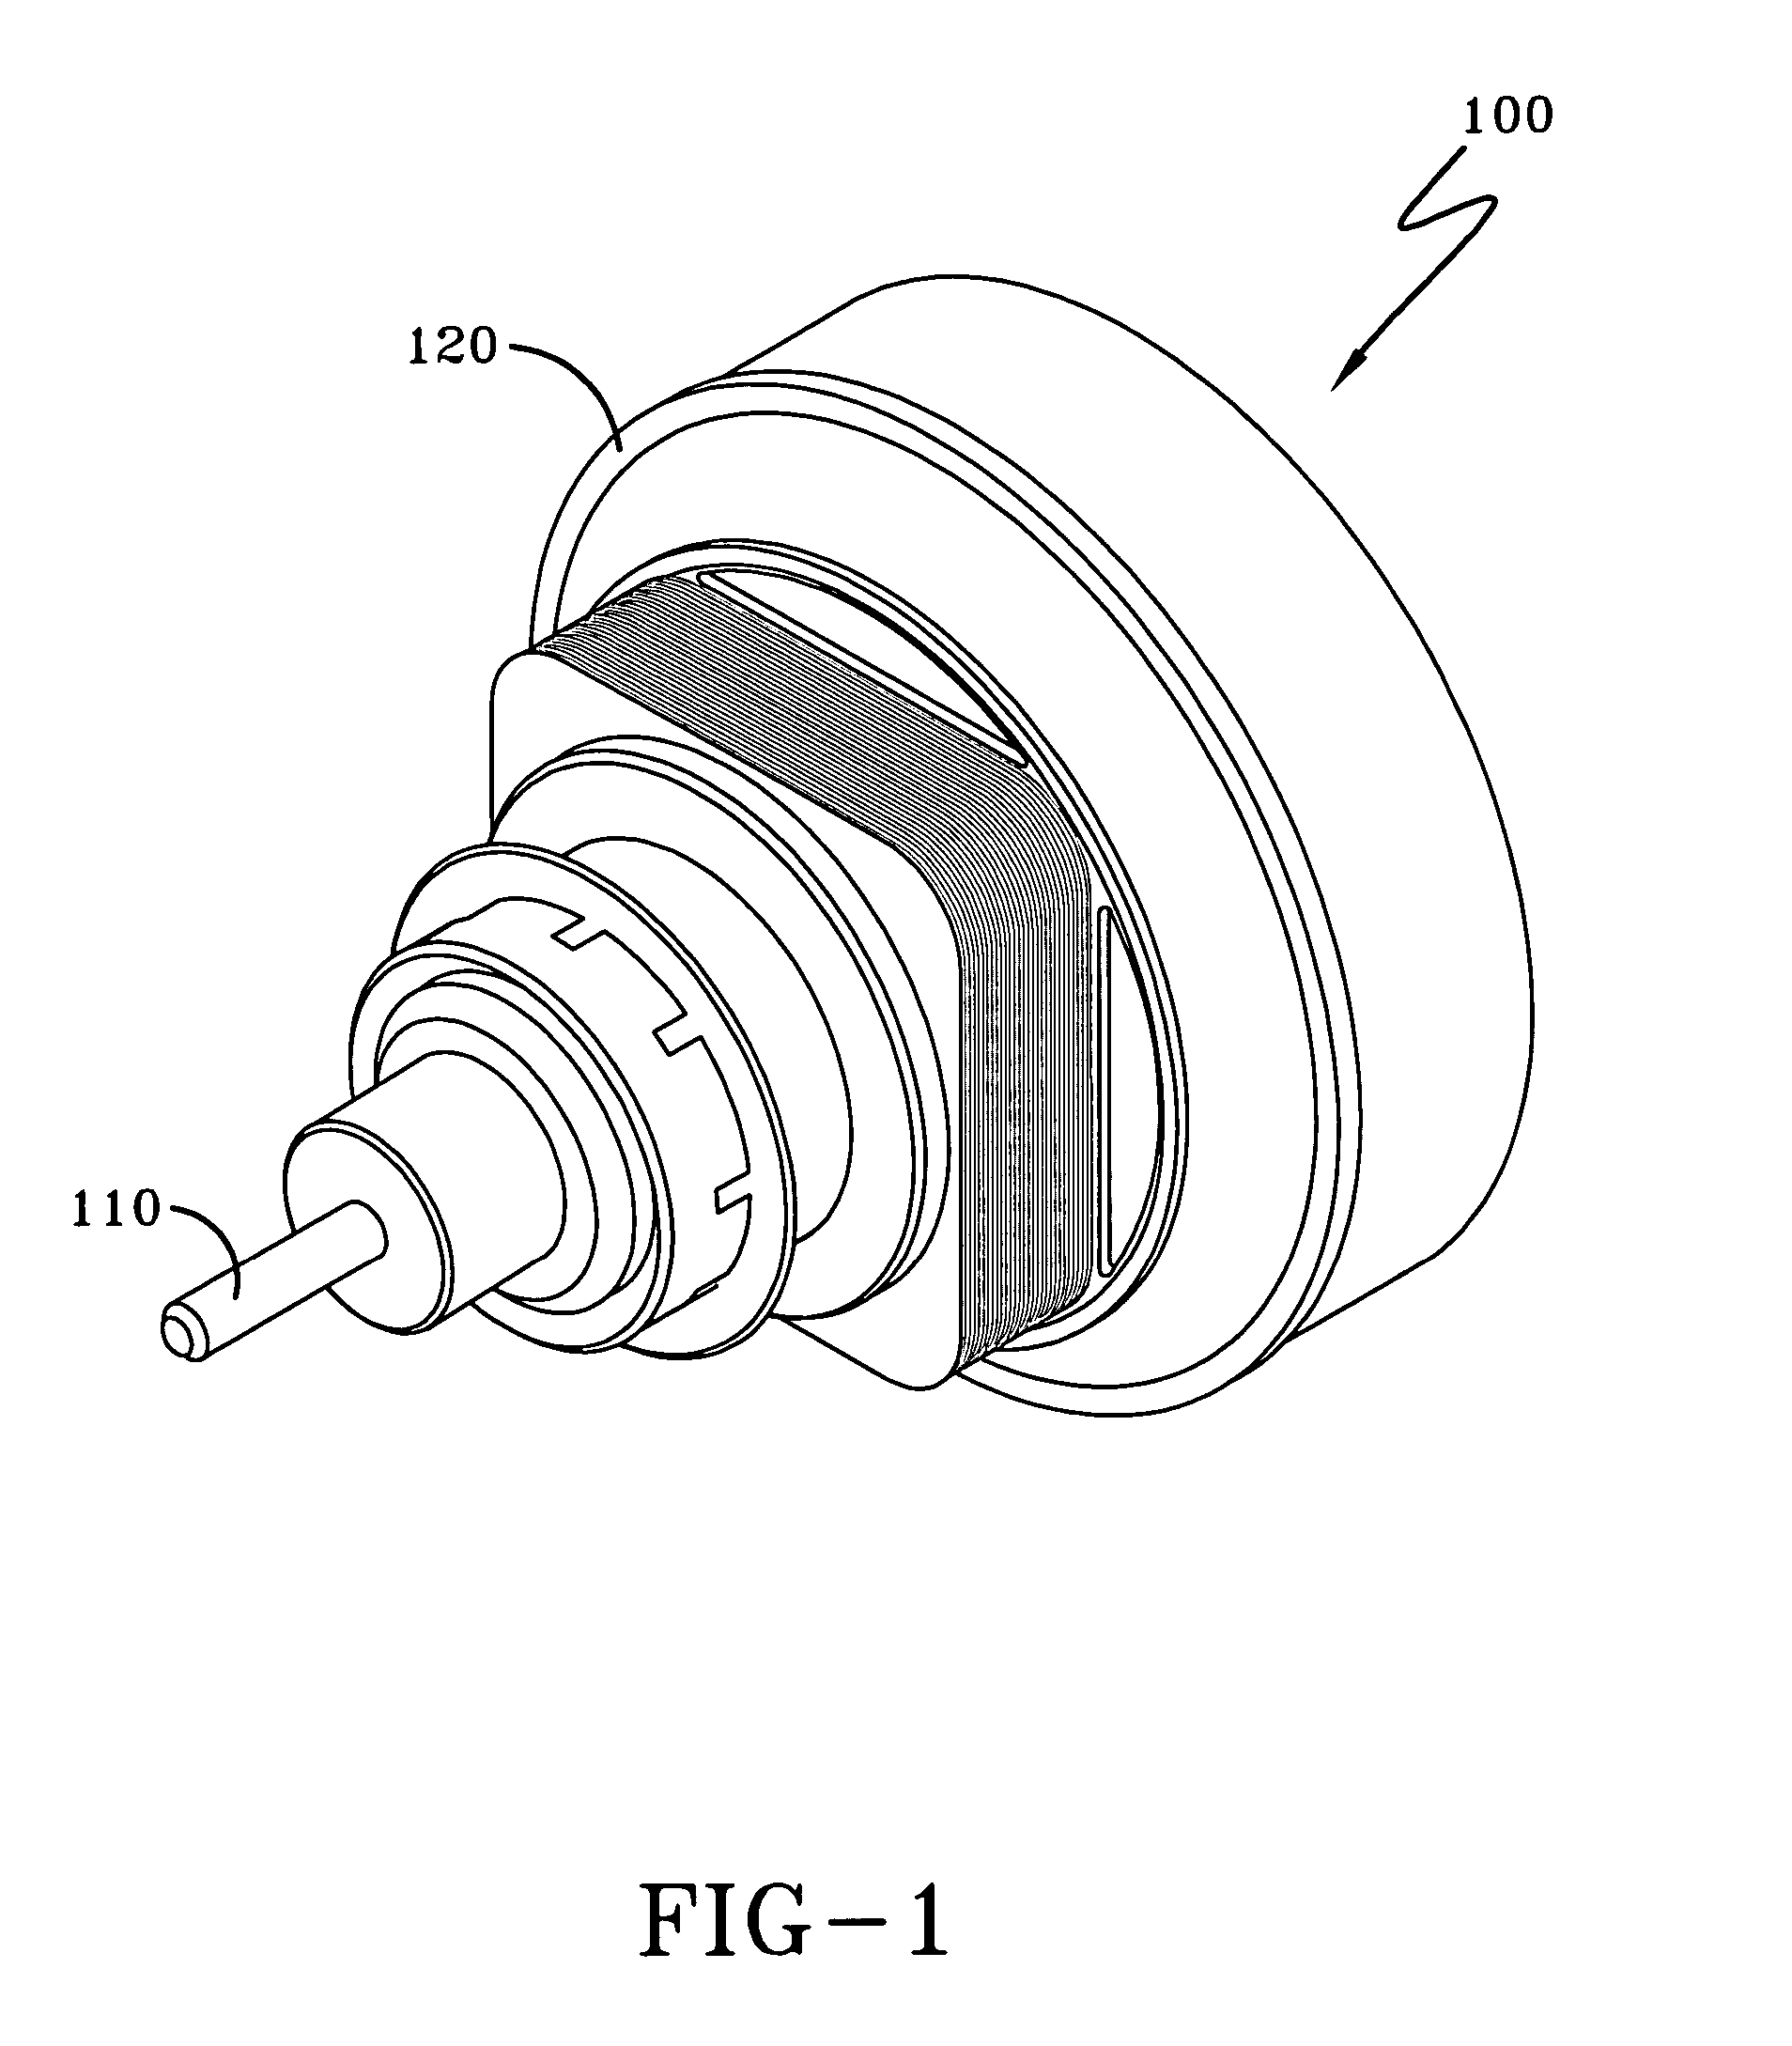 Diffuser for a motor fan assembly